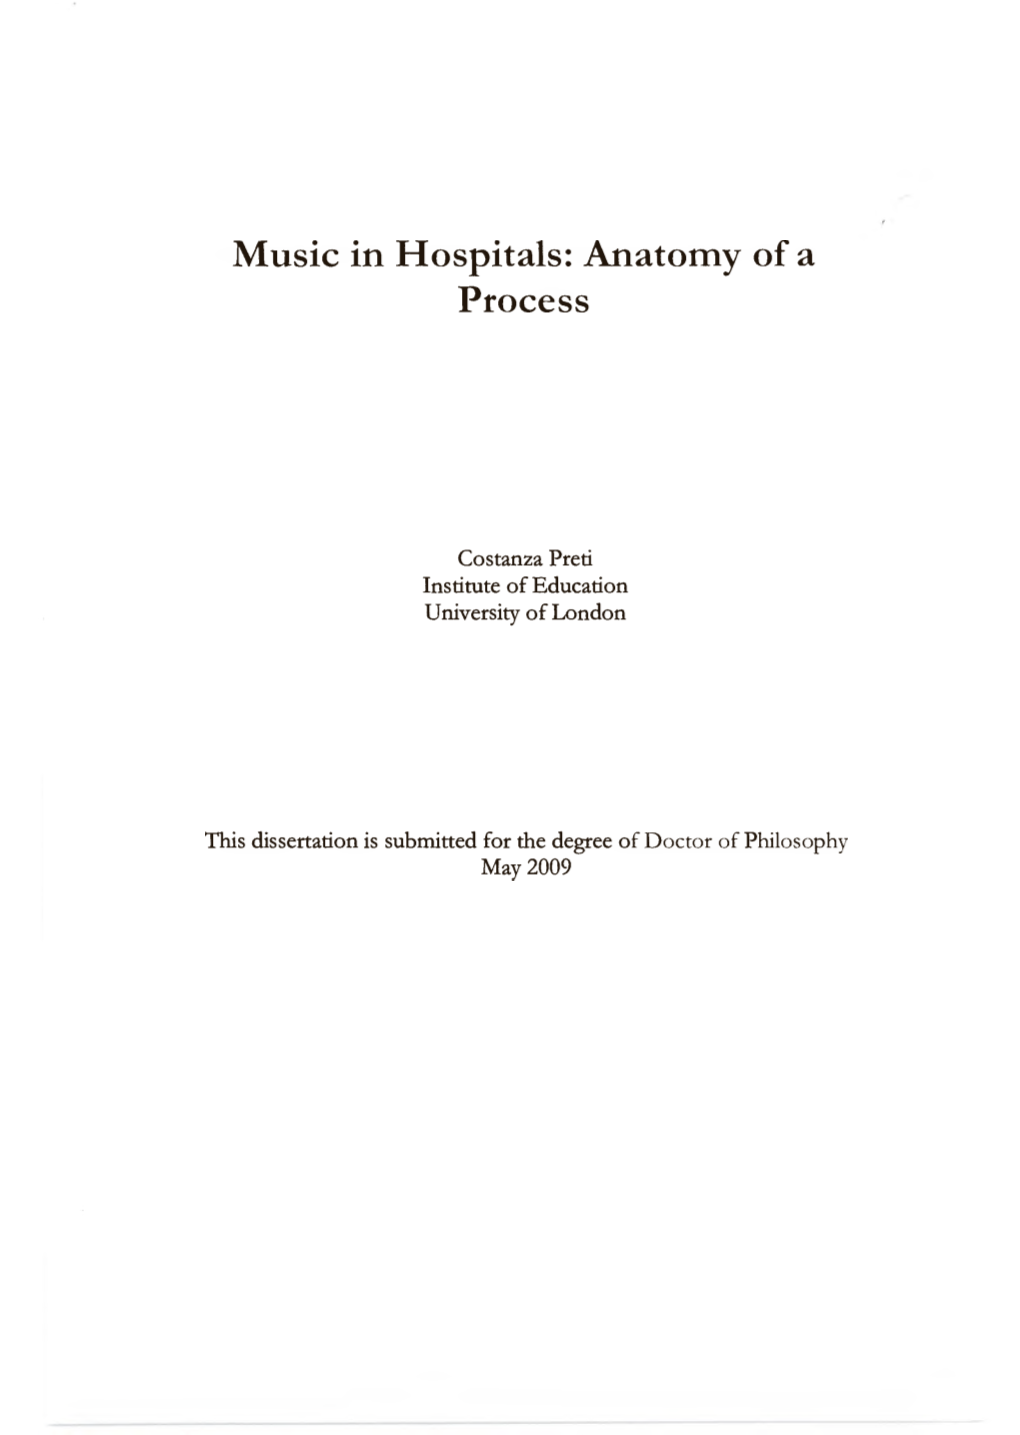 Music in Hospitals: Anatomy of a Process